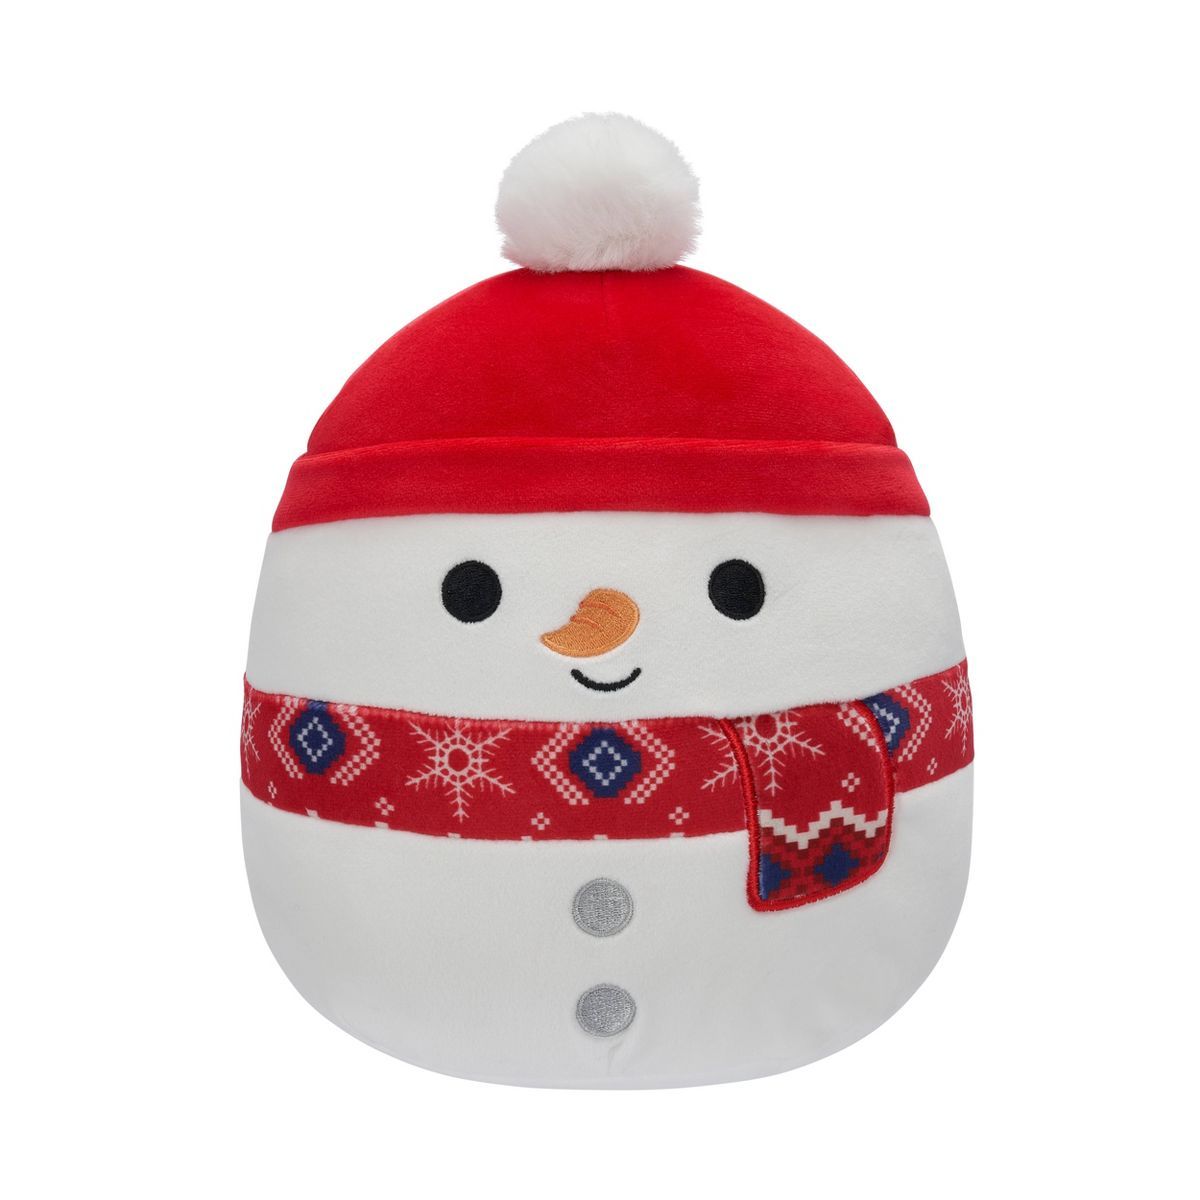 Squishmallows 8" Manny Snowman with Red Hat and Scarf Little Plush | Target